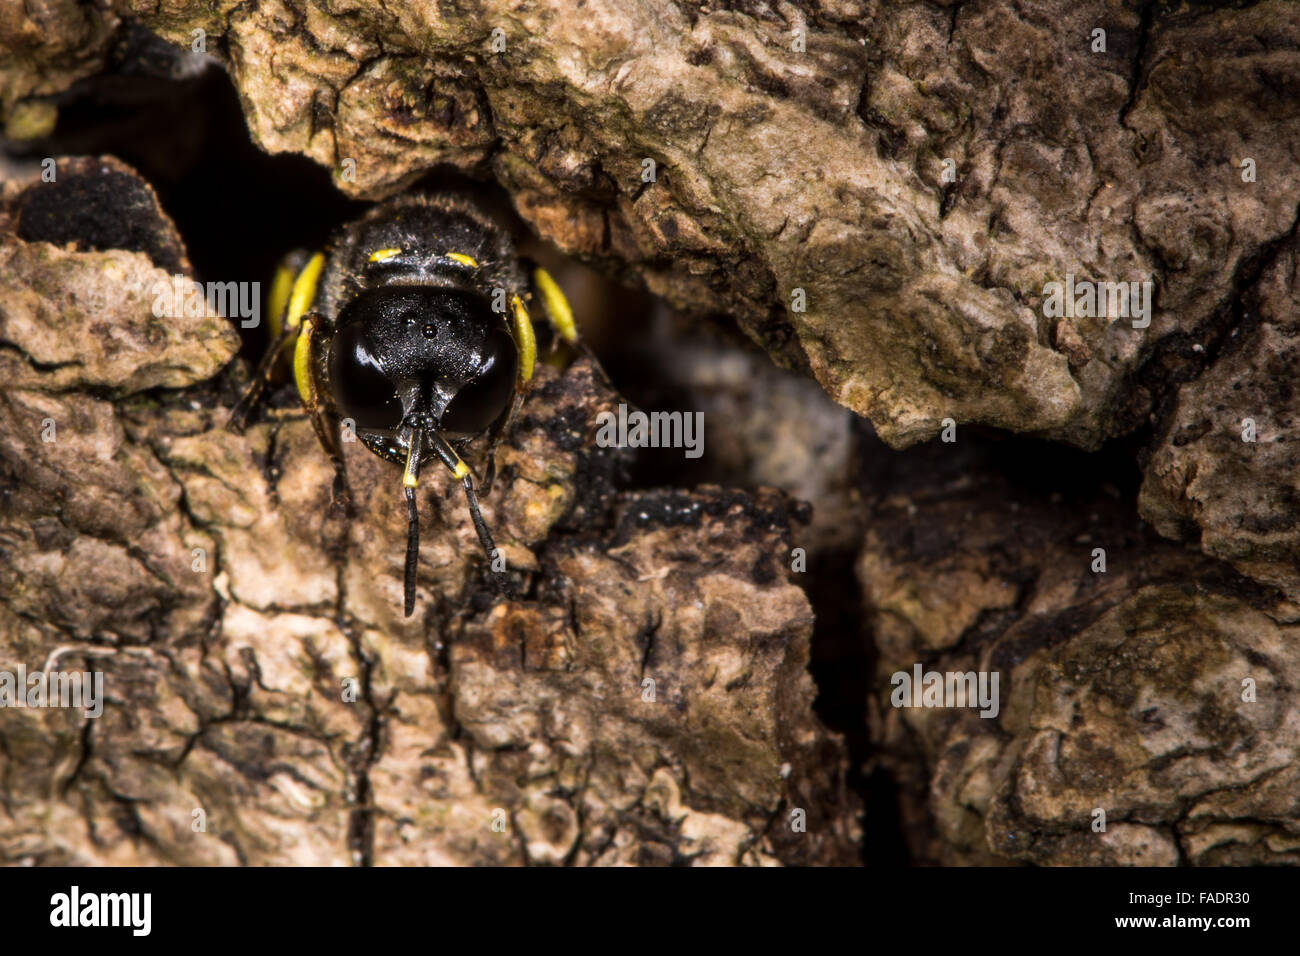 Digger wasp Ectemnius continuus emerging from tunnel in log. A digger wasp in the family Crabronidae, emerging from a burrow Stock Photo